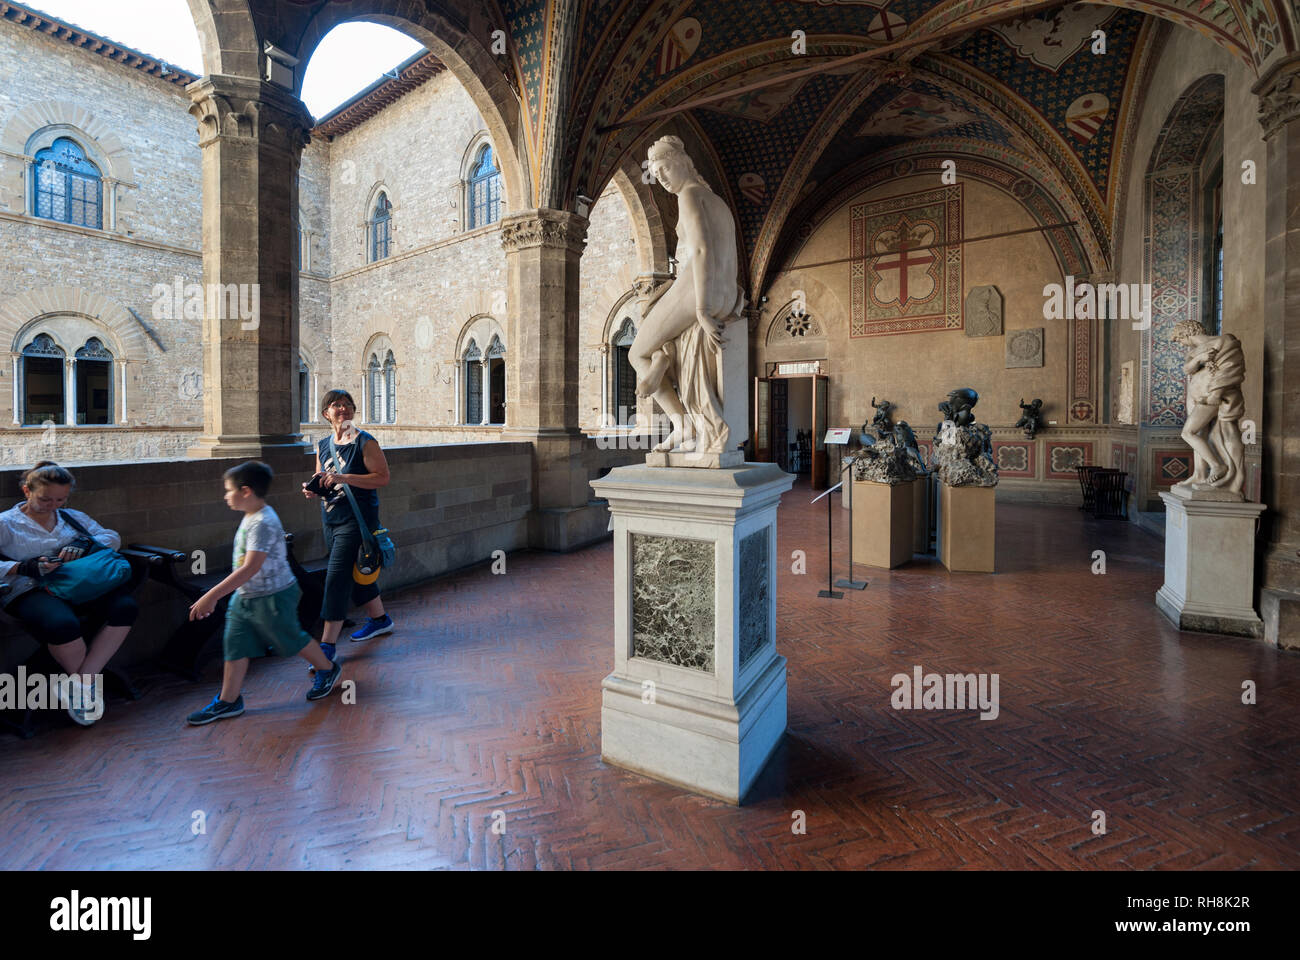 Florence, Italy - 2018, July 1: A view of the Loggia, on the first floor of the Bargello National Museum. Visitors admire the “Architecture” marble st Stock Photo